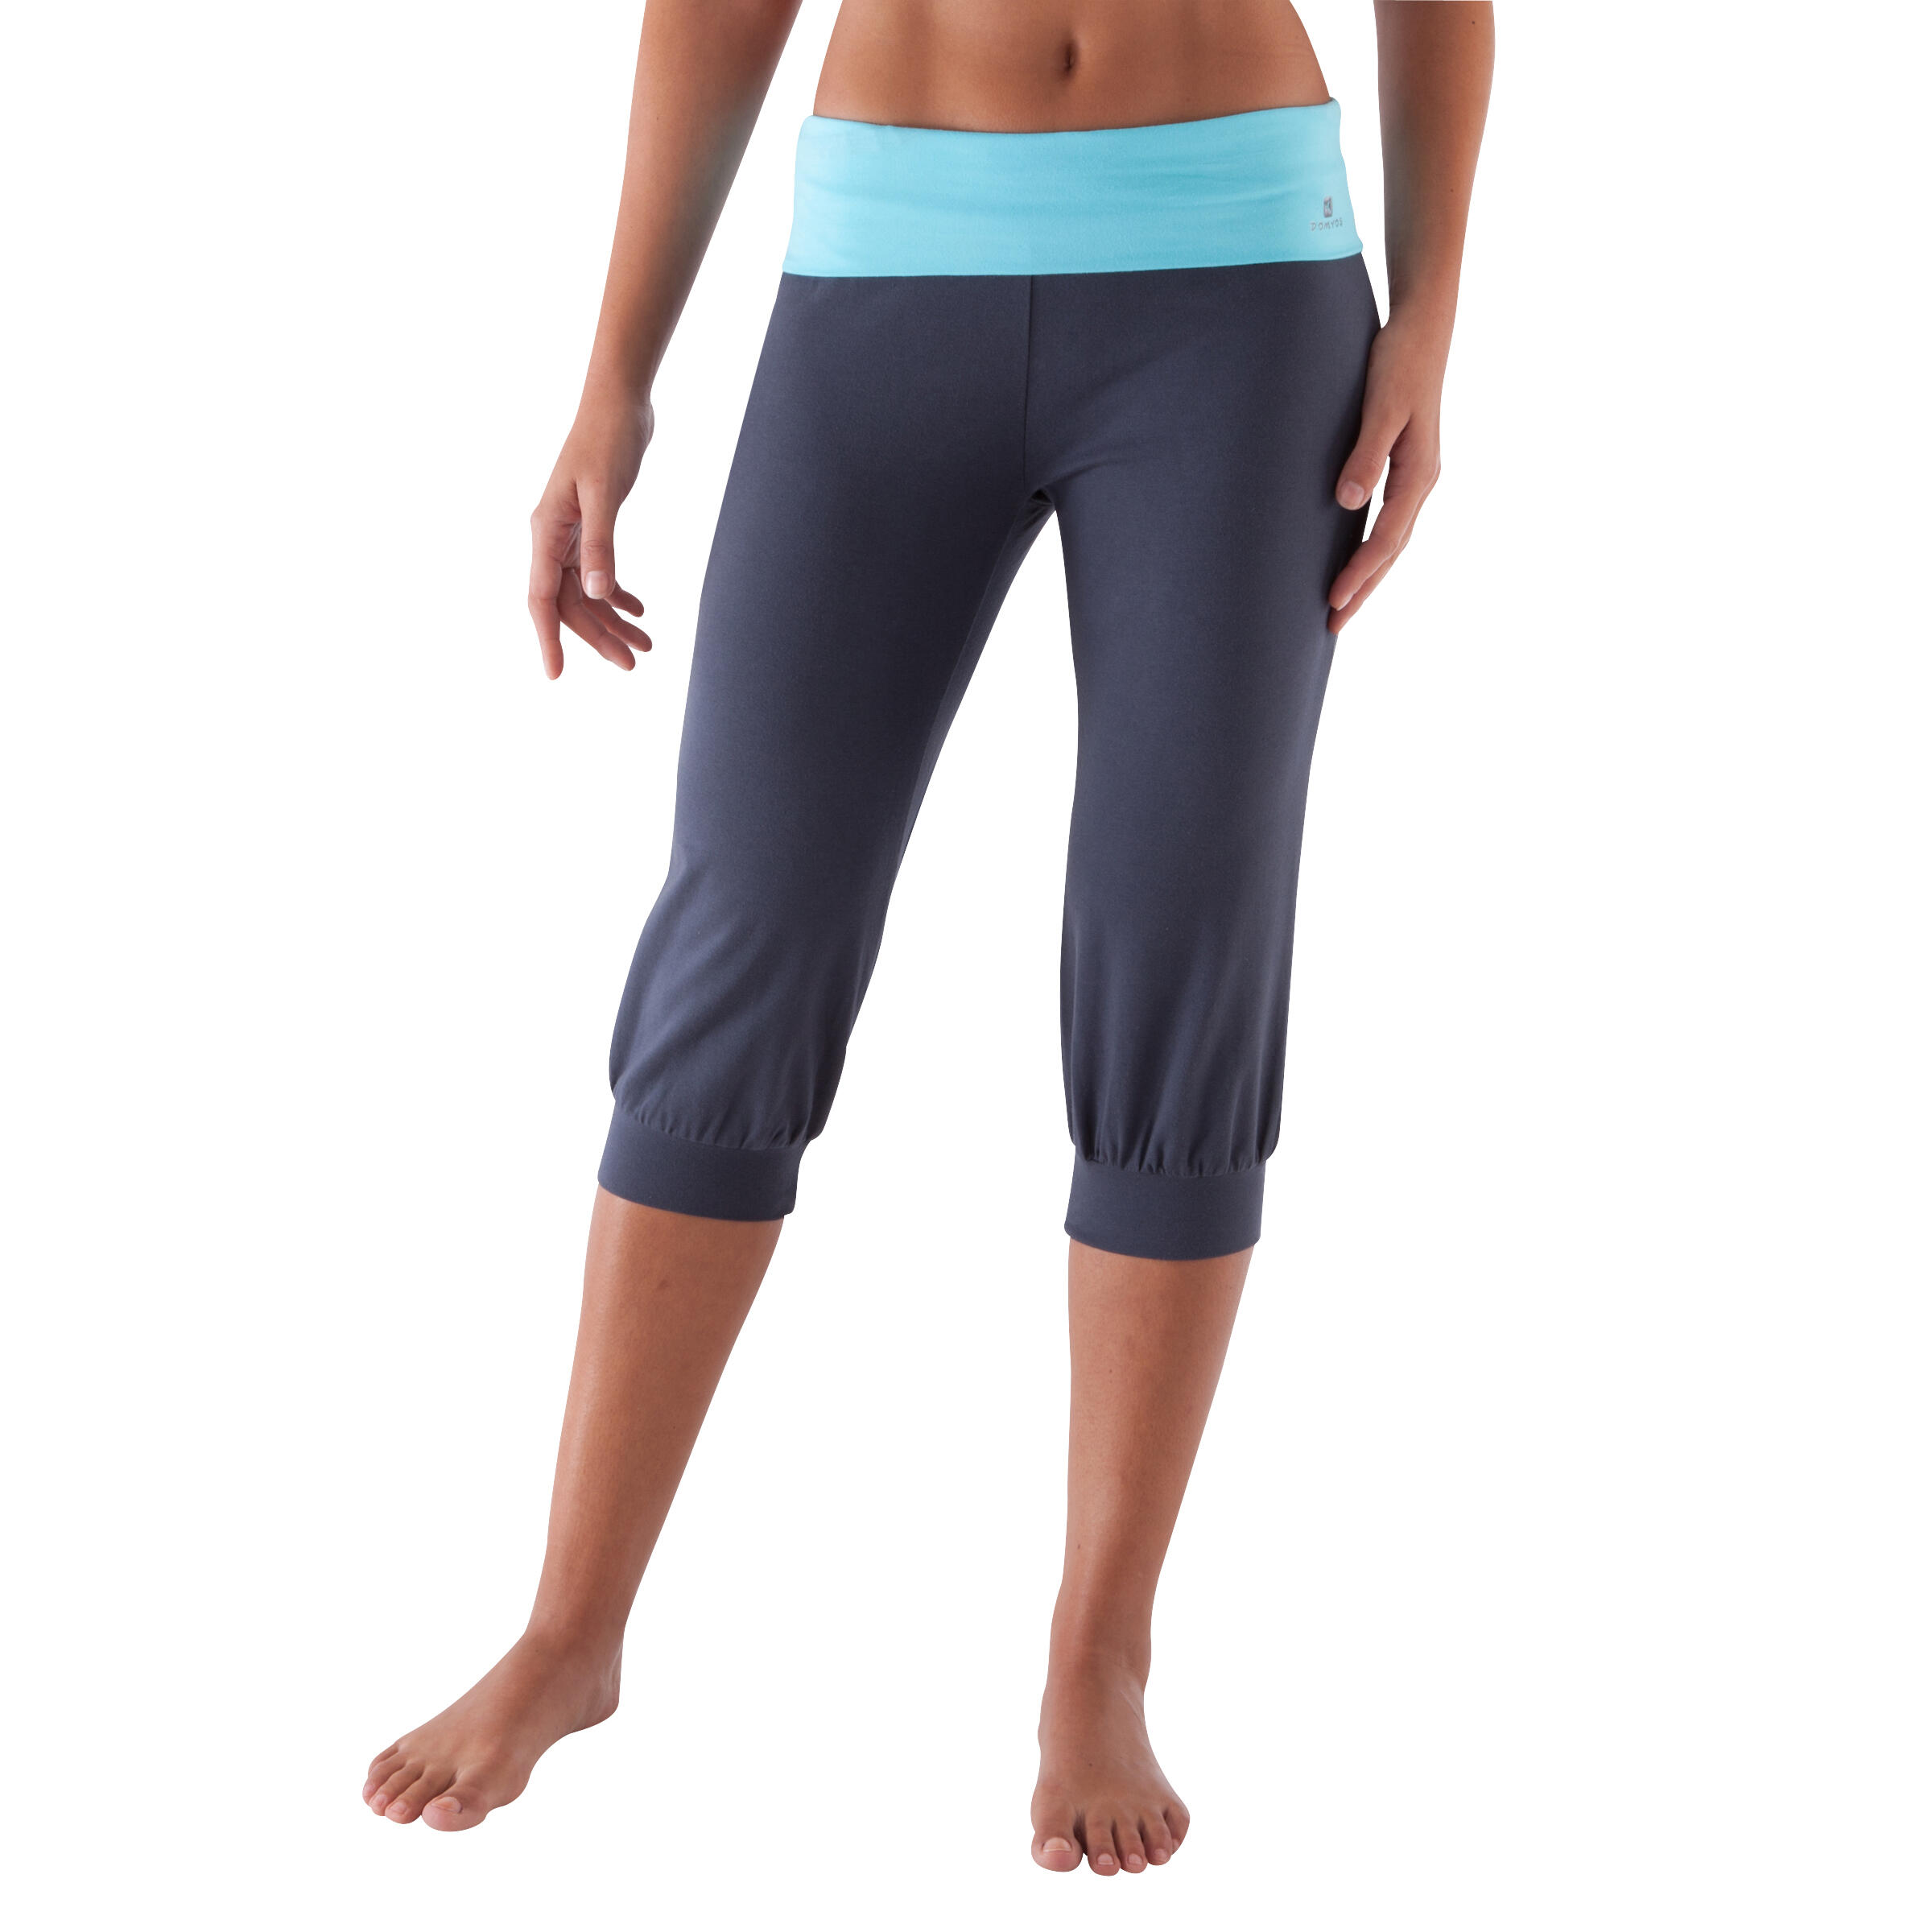 Women's Gentle Gym Yoga and Pilates Organic-Cotton Cropped Bottoms - Grey/Blue 2/10